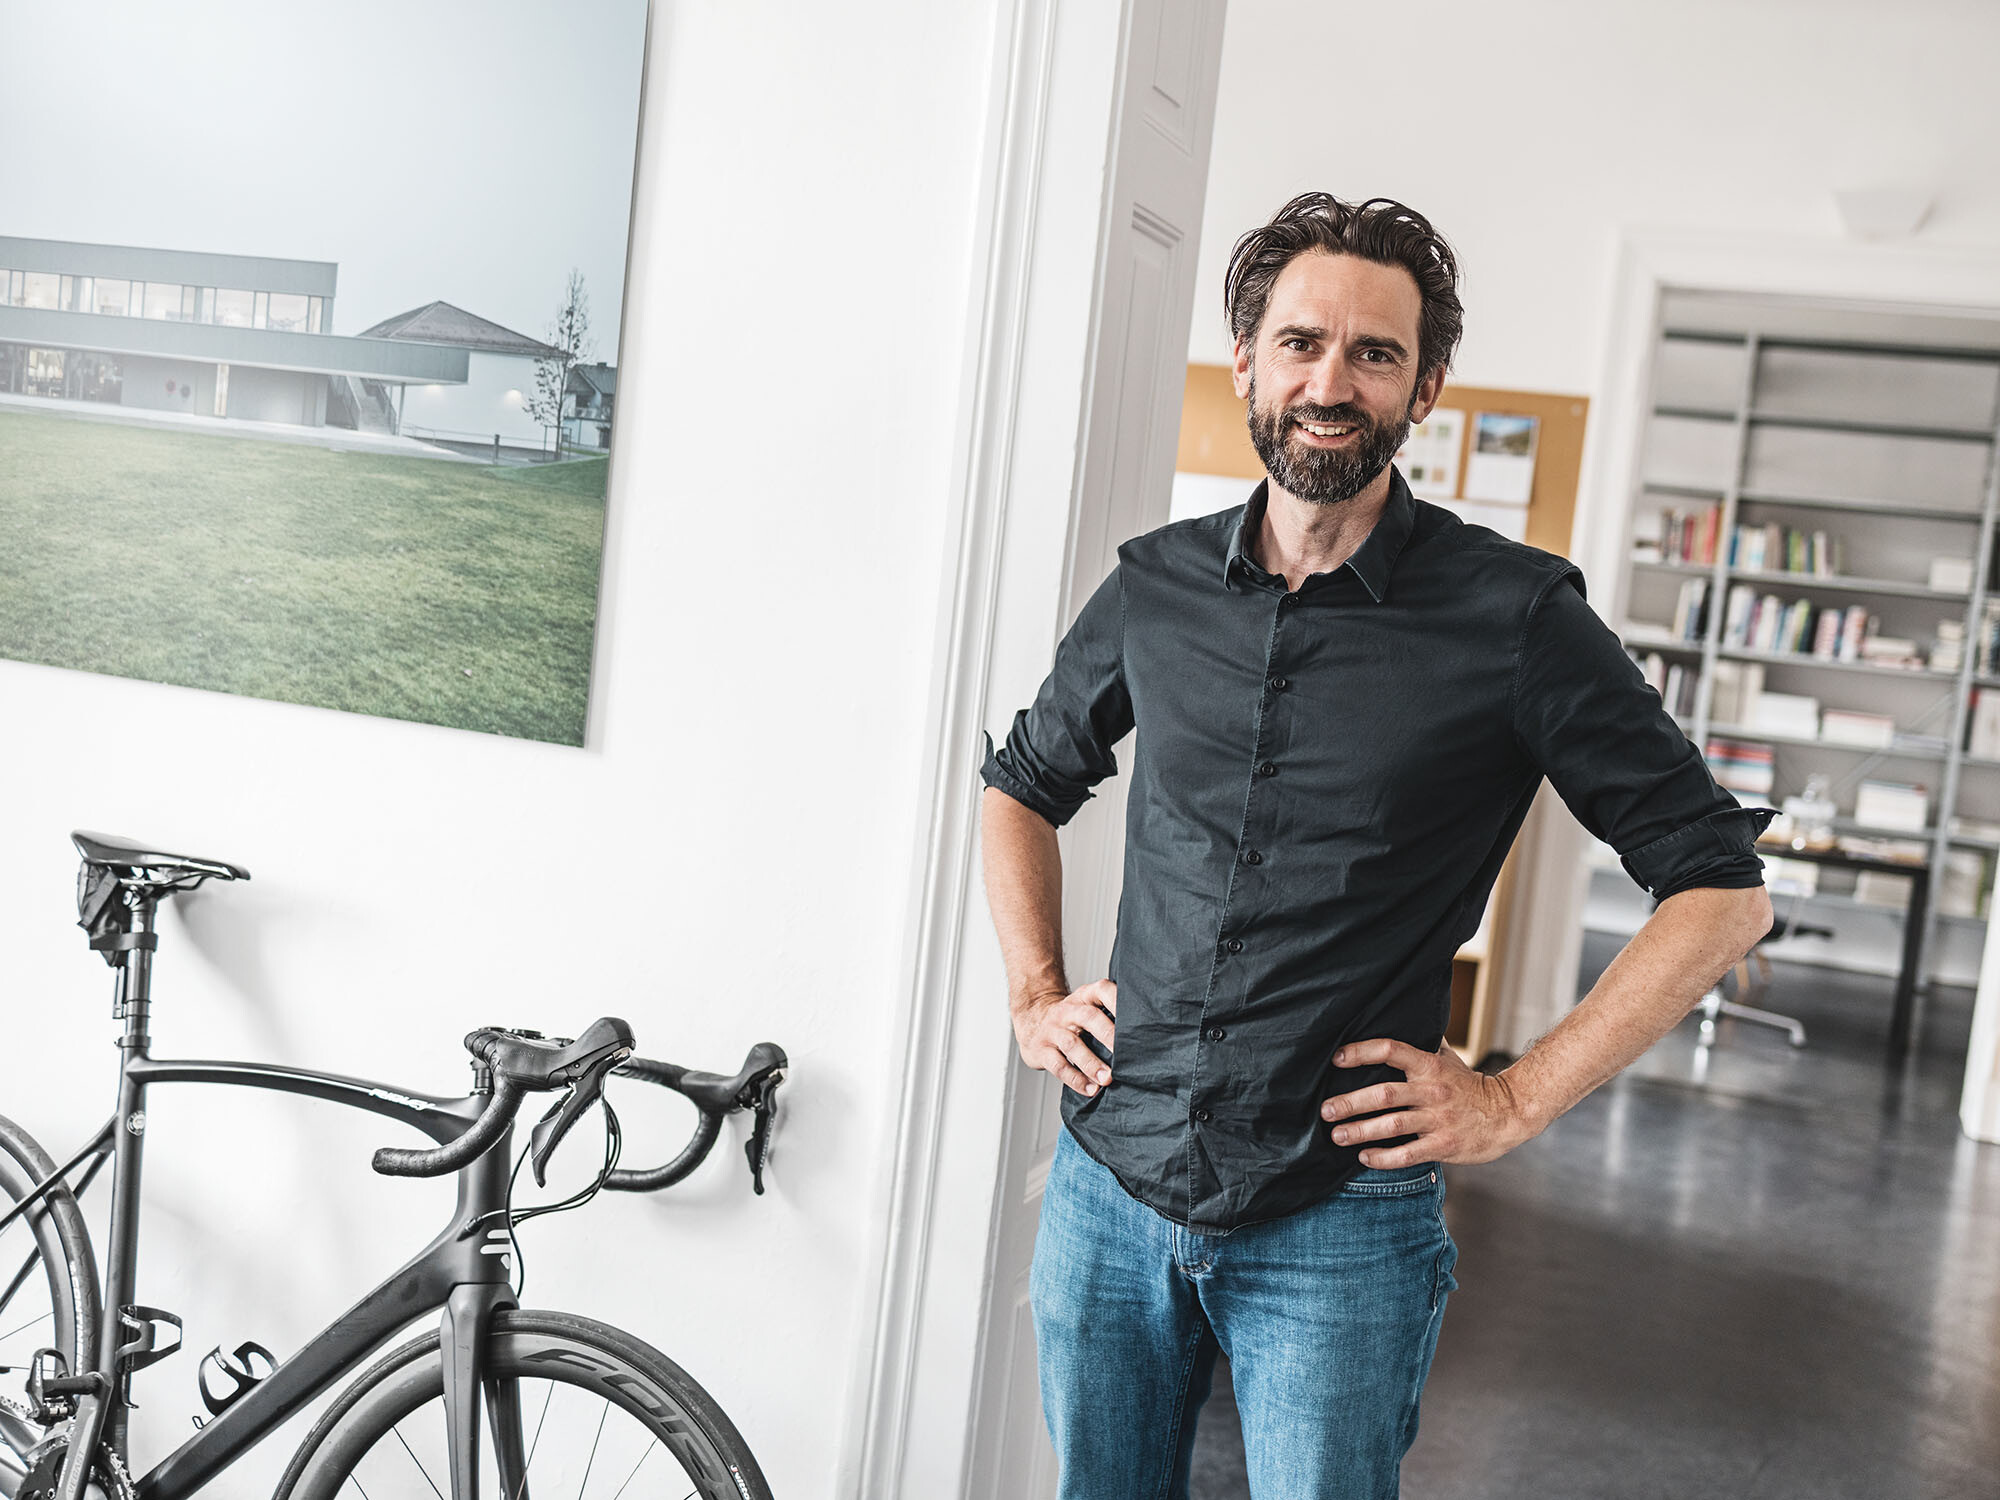 A portrait of the lead architect Thomas Heil, an office space extending behind him and a bicycle leaning against the wall next to him.